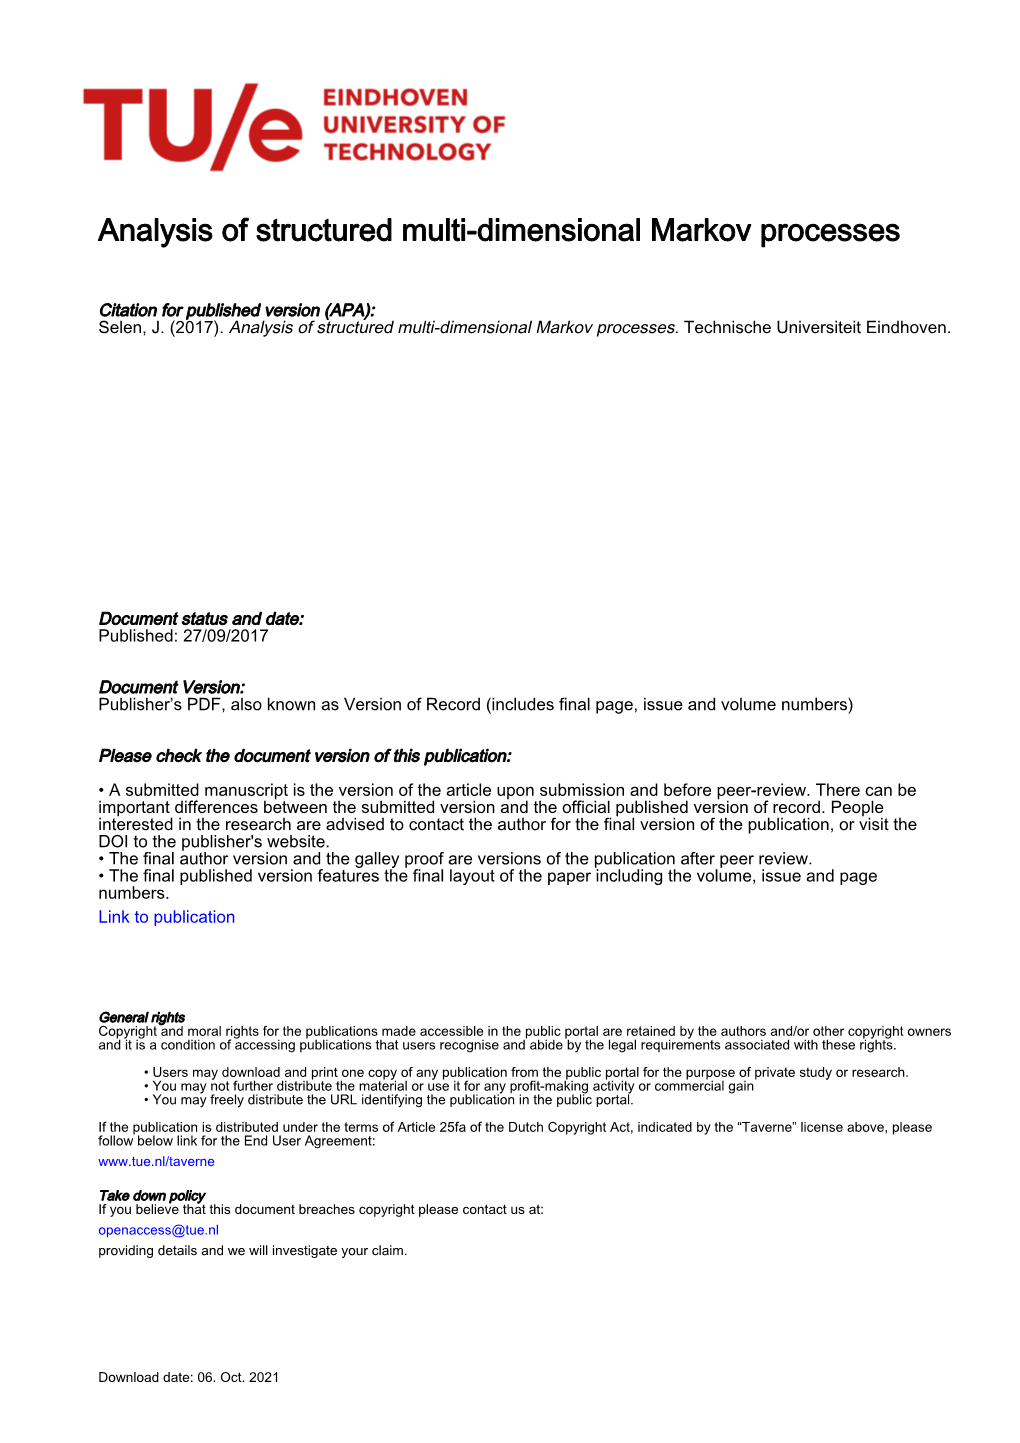 Analysis of Structured Multi-Dimensional Markov Processes